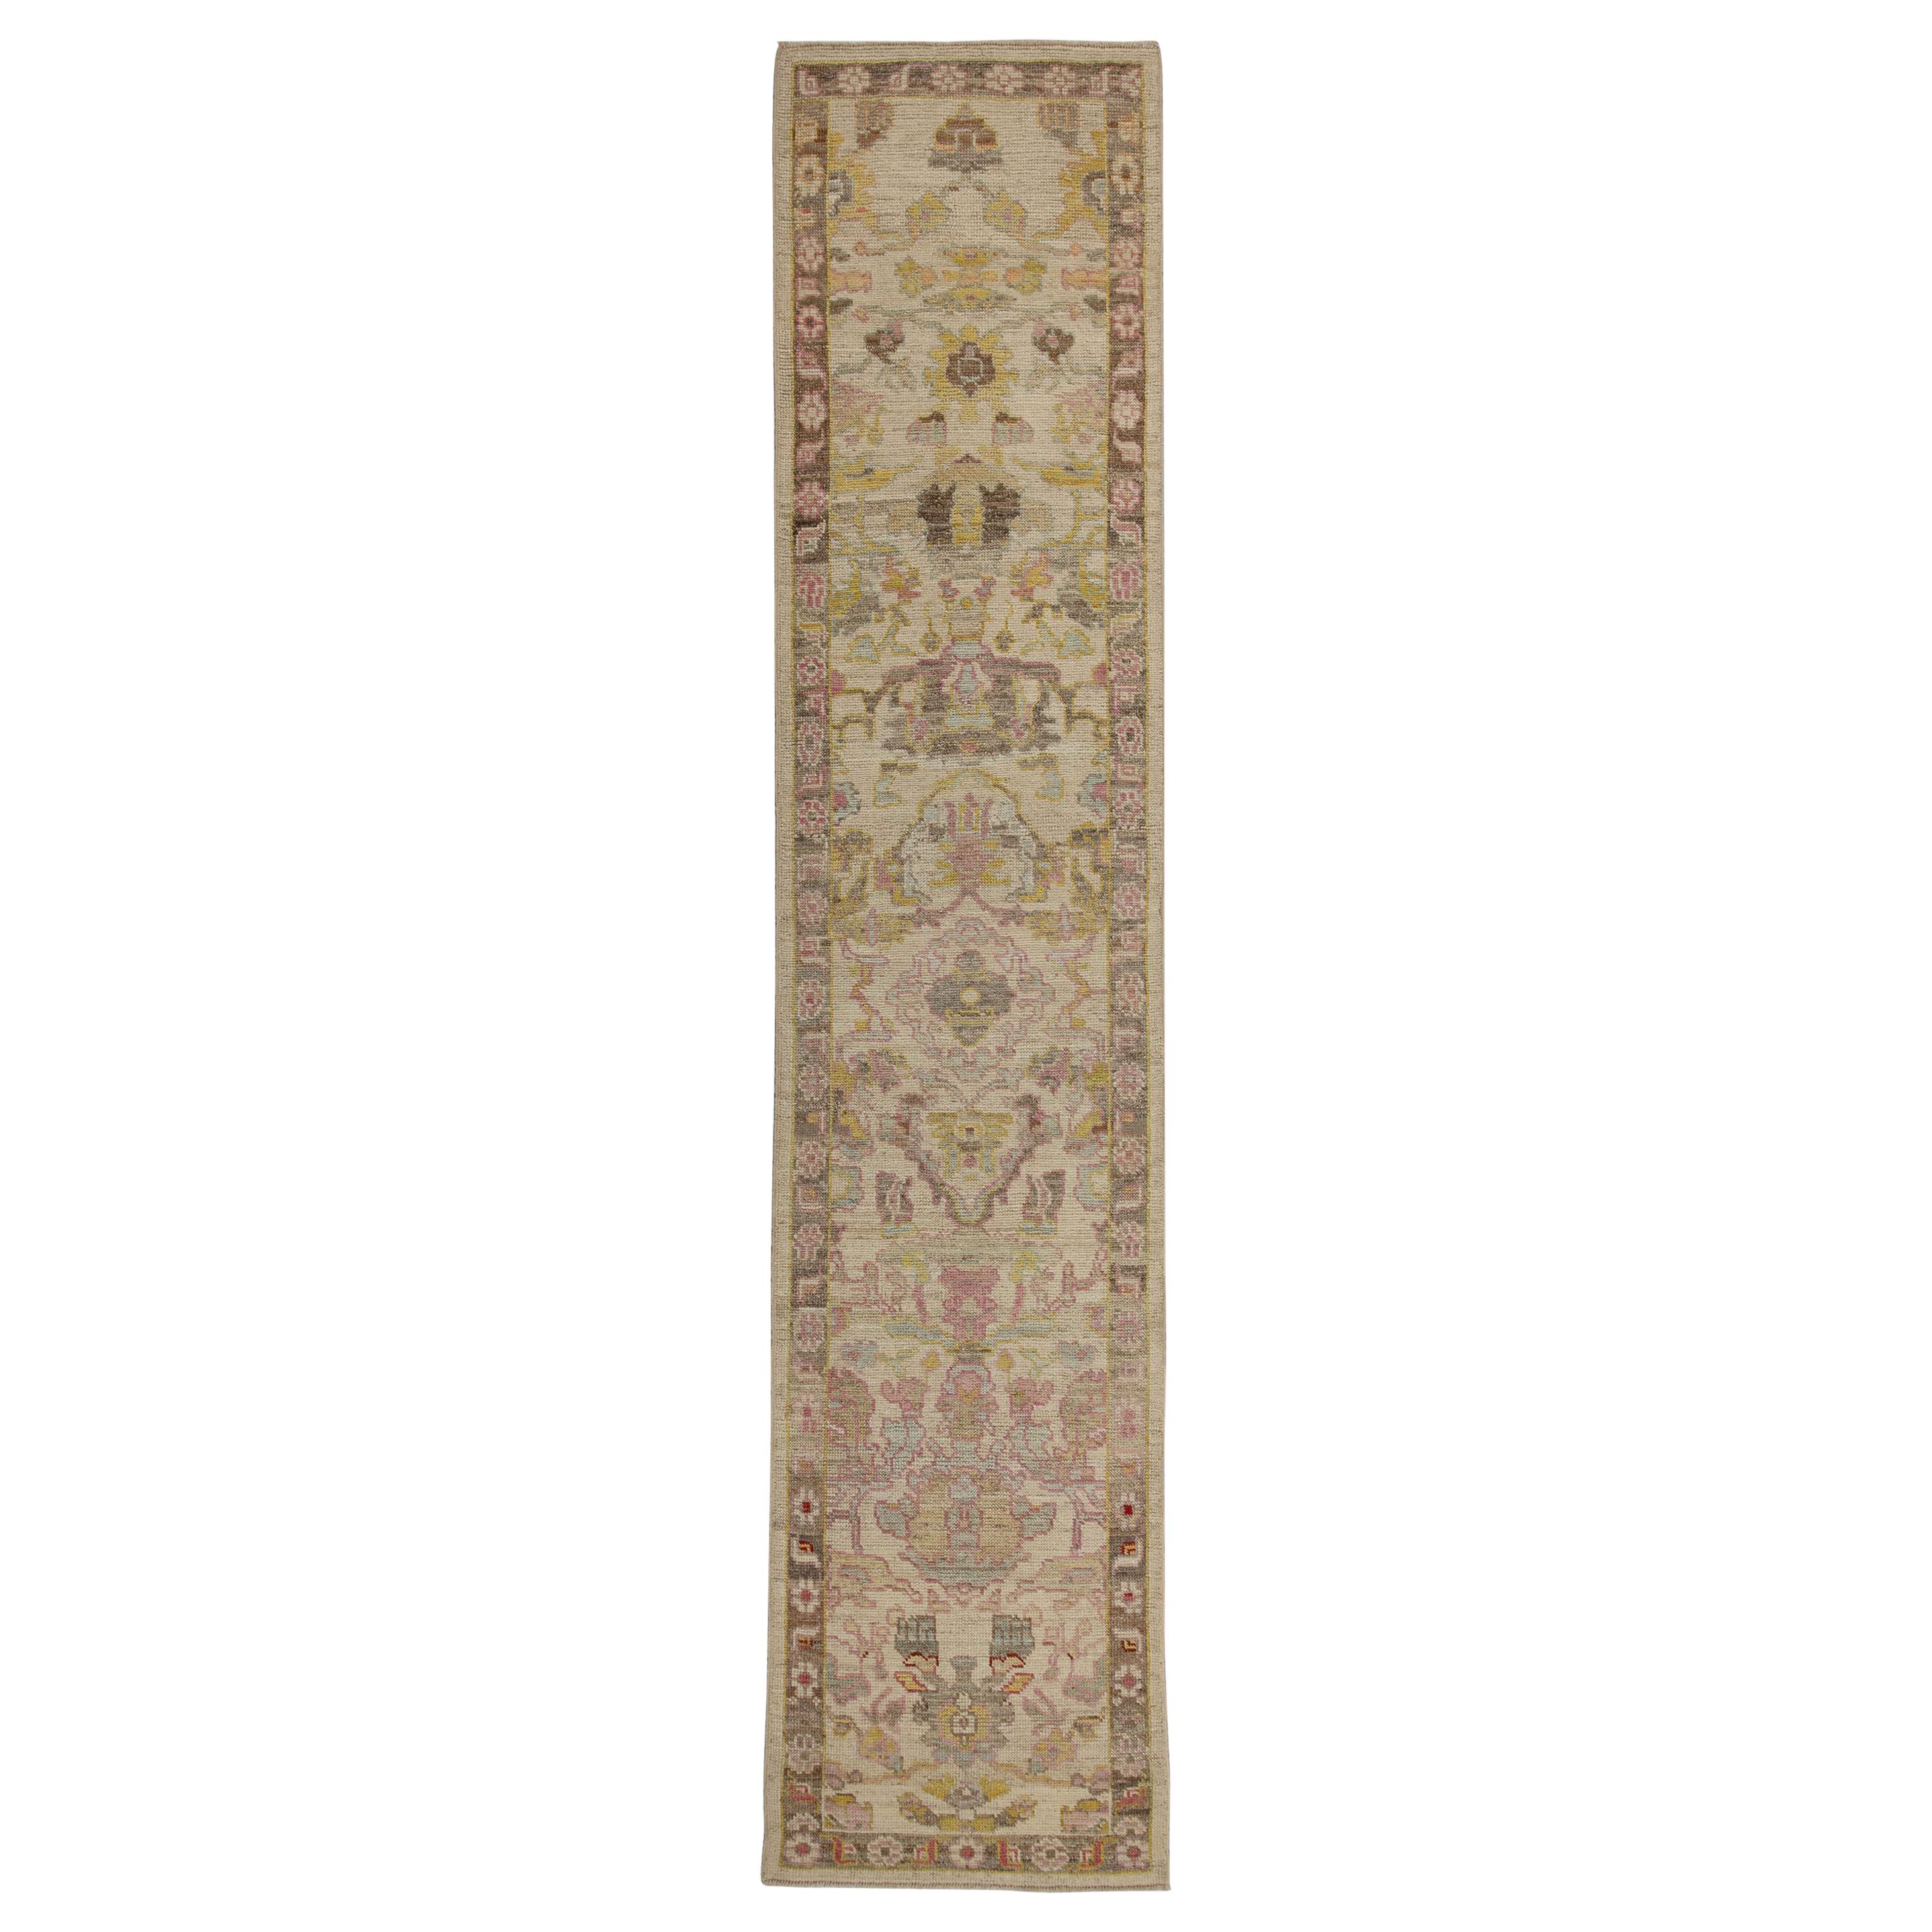 Contemporary Oushak Runner Rug from Turkey with Brown and Pink Floral Patterns